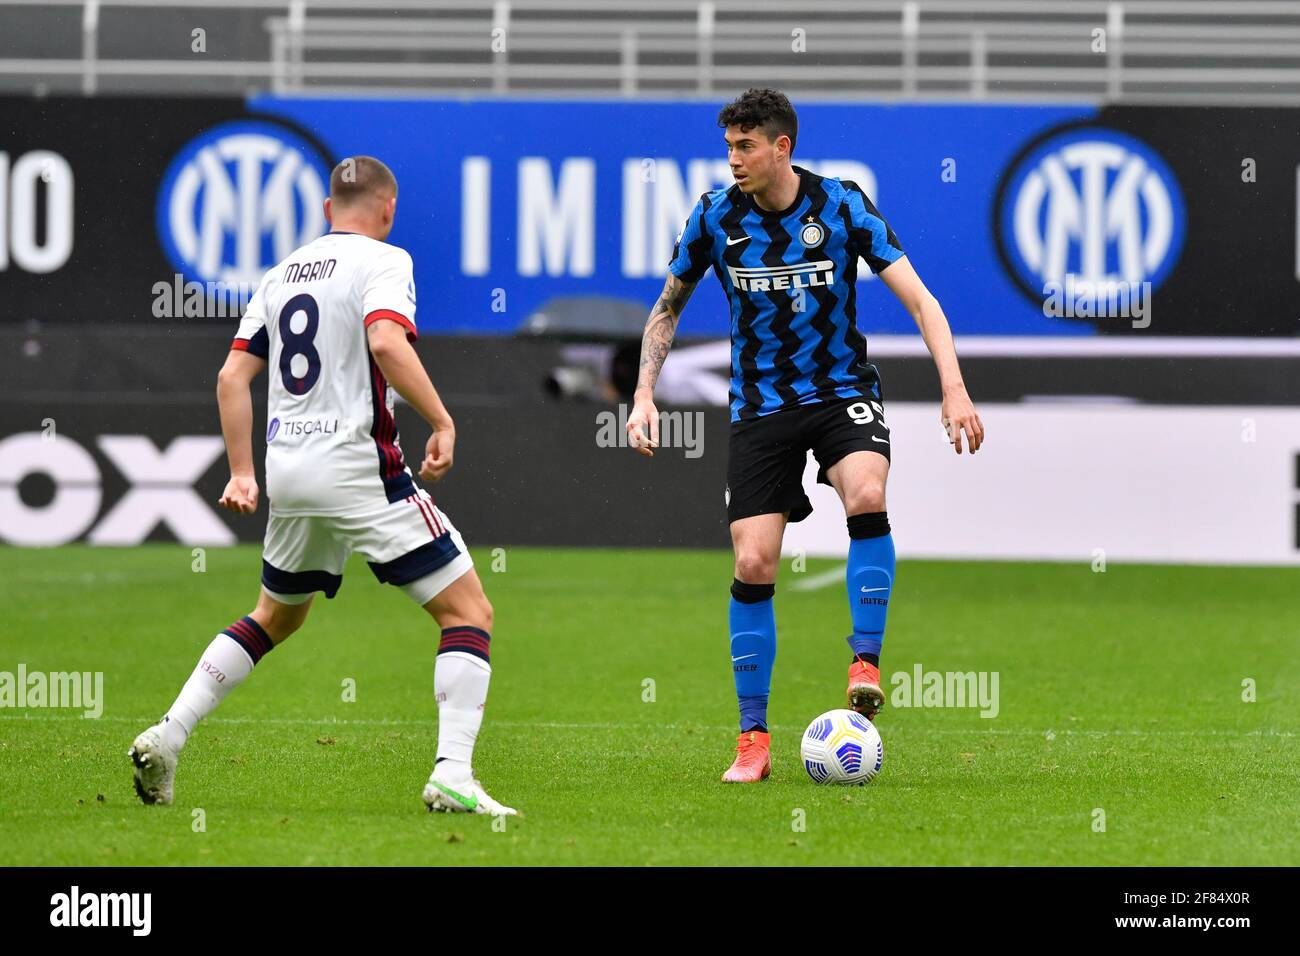 Milan, Italy. 11th Apr, 2021. Alessandro Bastoni (95) of Inter Milan seen  during the Serie A match between Inter Milan and Cagliari Calcio at the San  Siro in Milan, Italy. (Photo Credit: